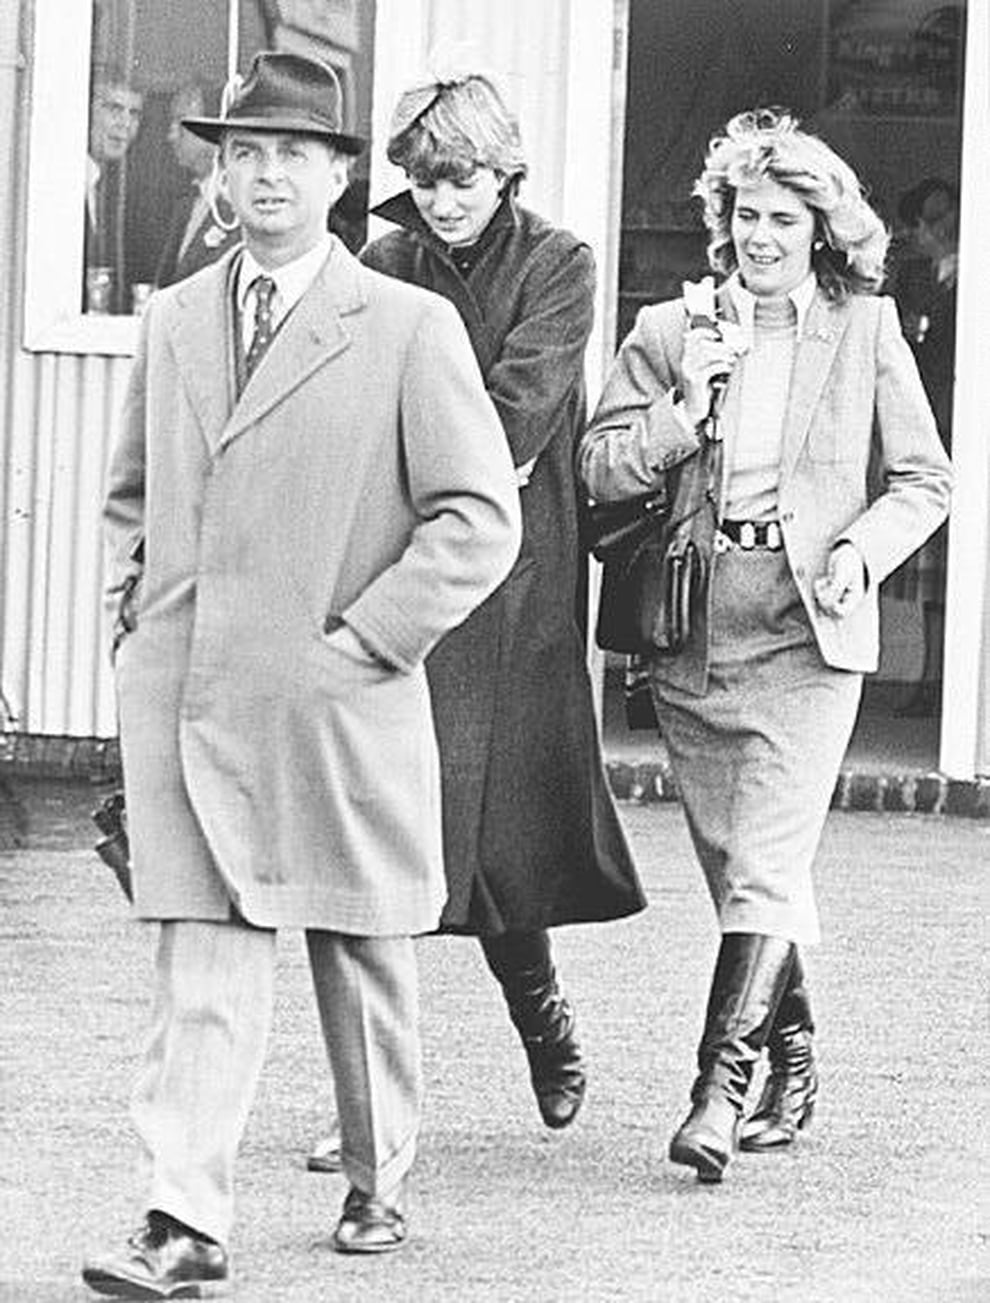 Day at the races when royal couple went public | Shropshire Star